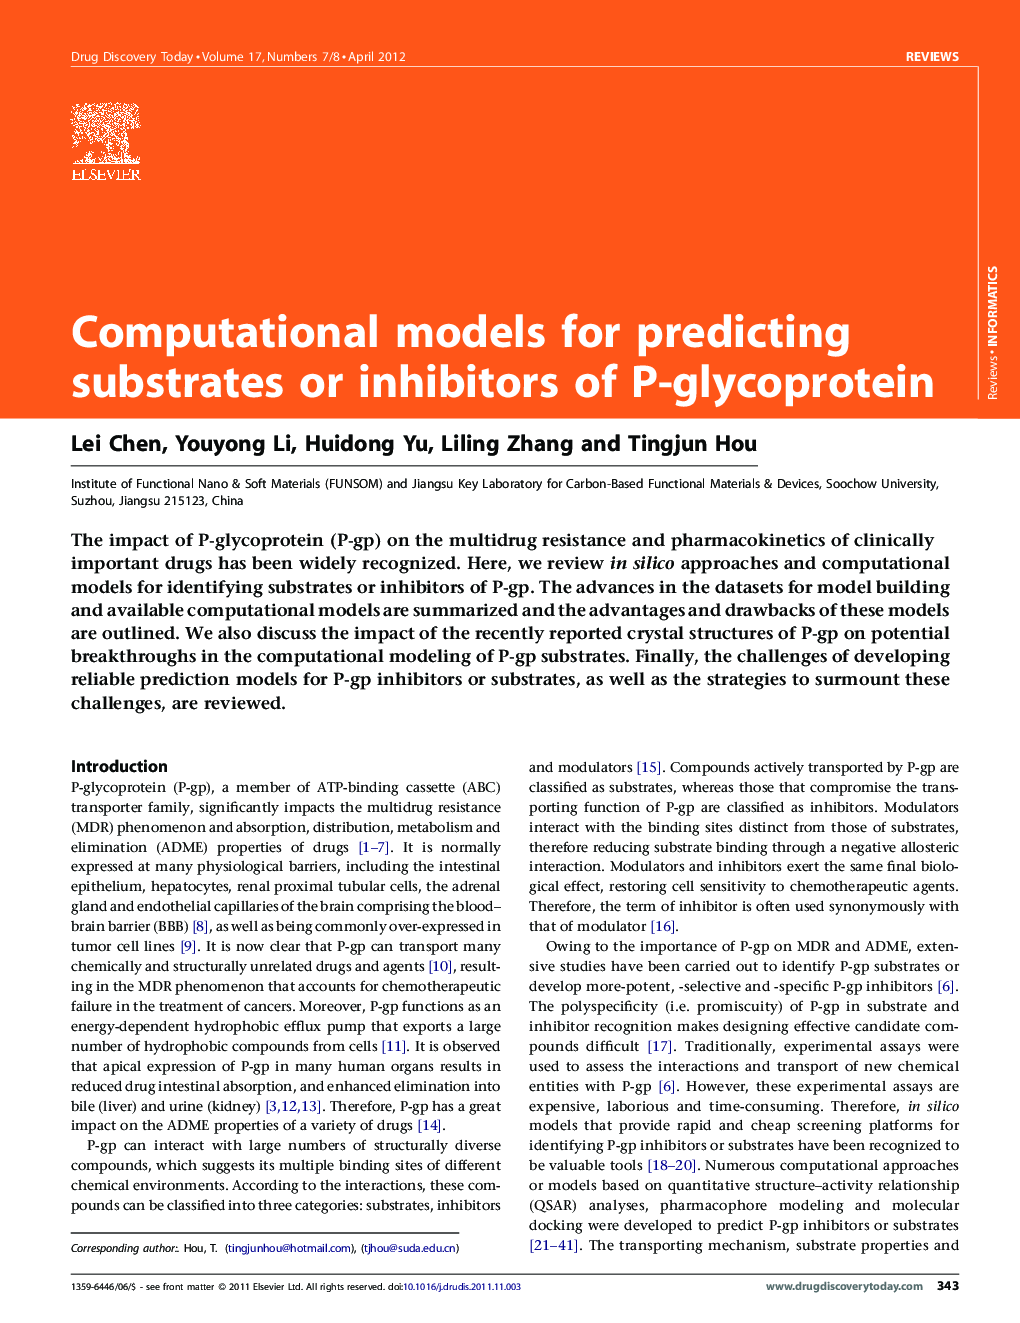 Computational models for predicting substrates or inhibitors of P-glycoprotein